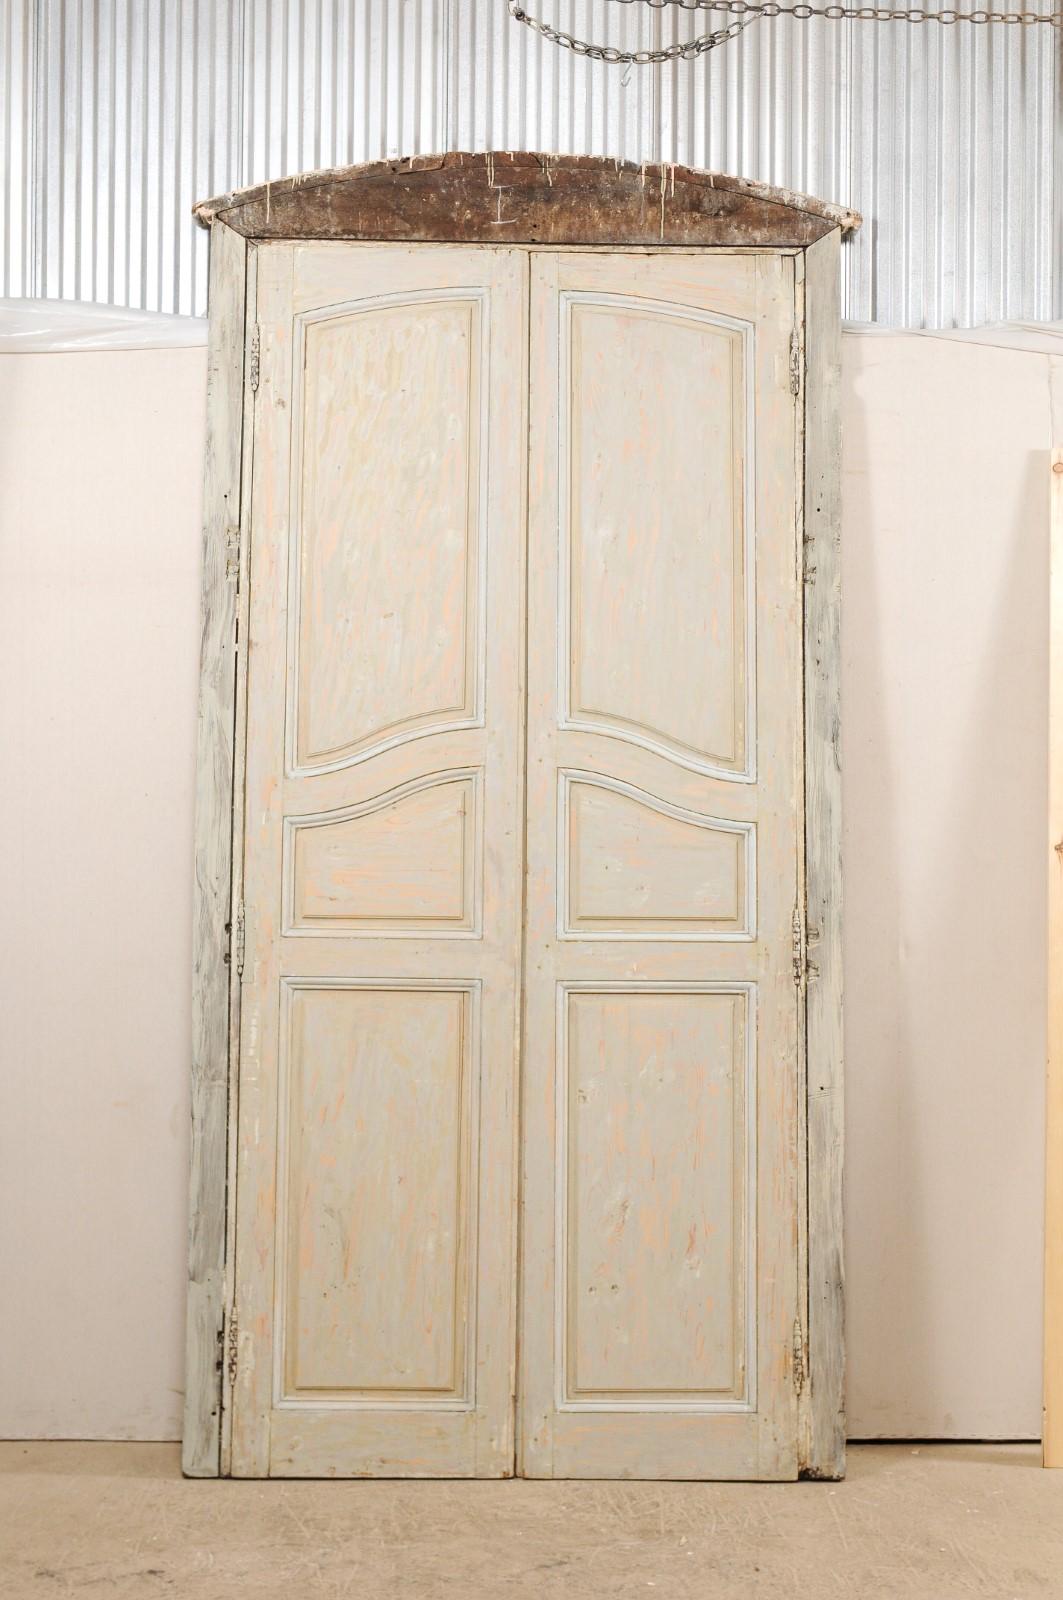 Tall 19th Century French Doors with Original Casing and Nicely Arched Crest 2